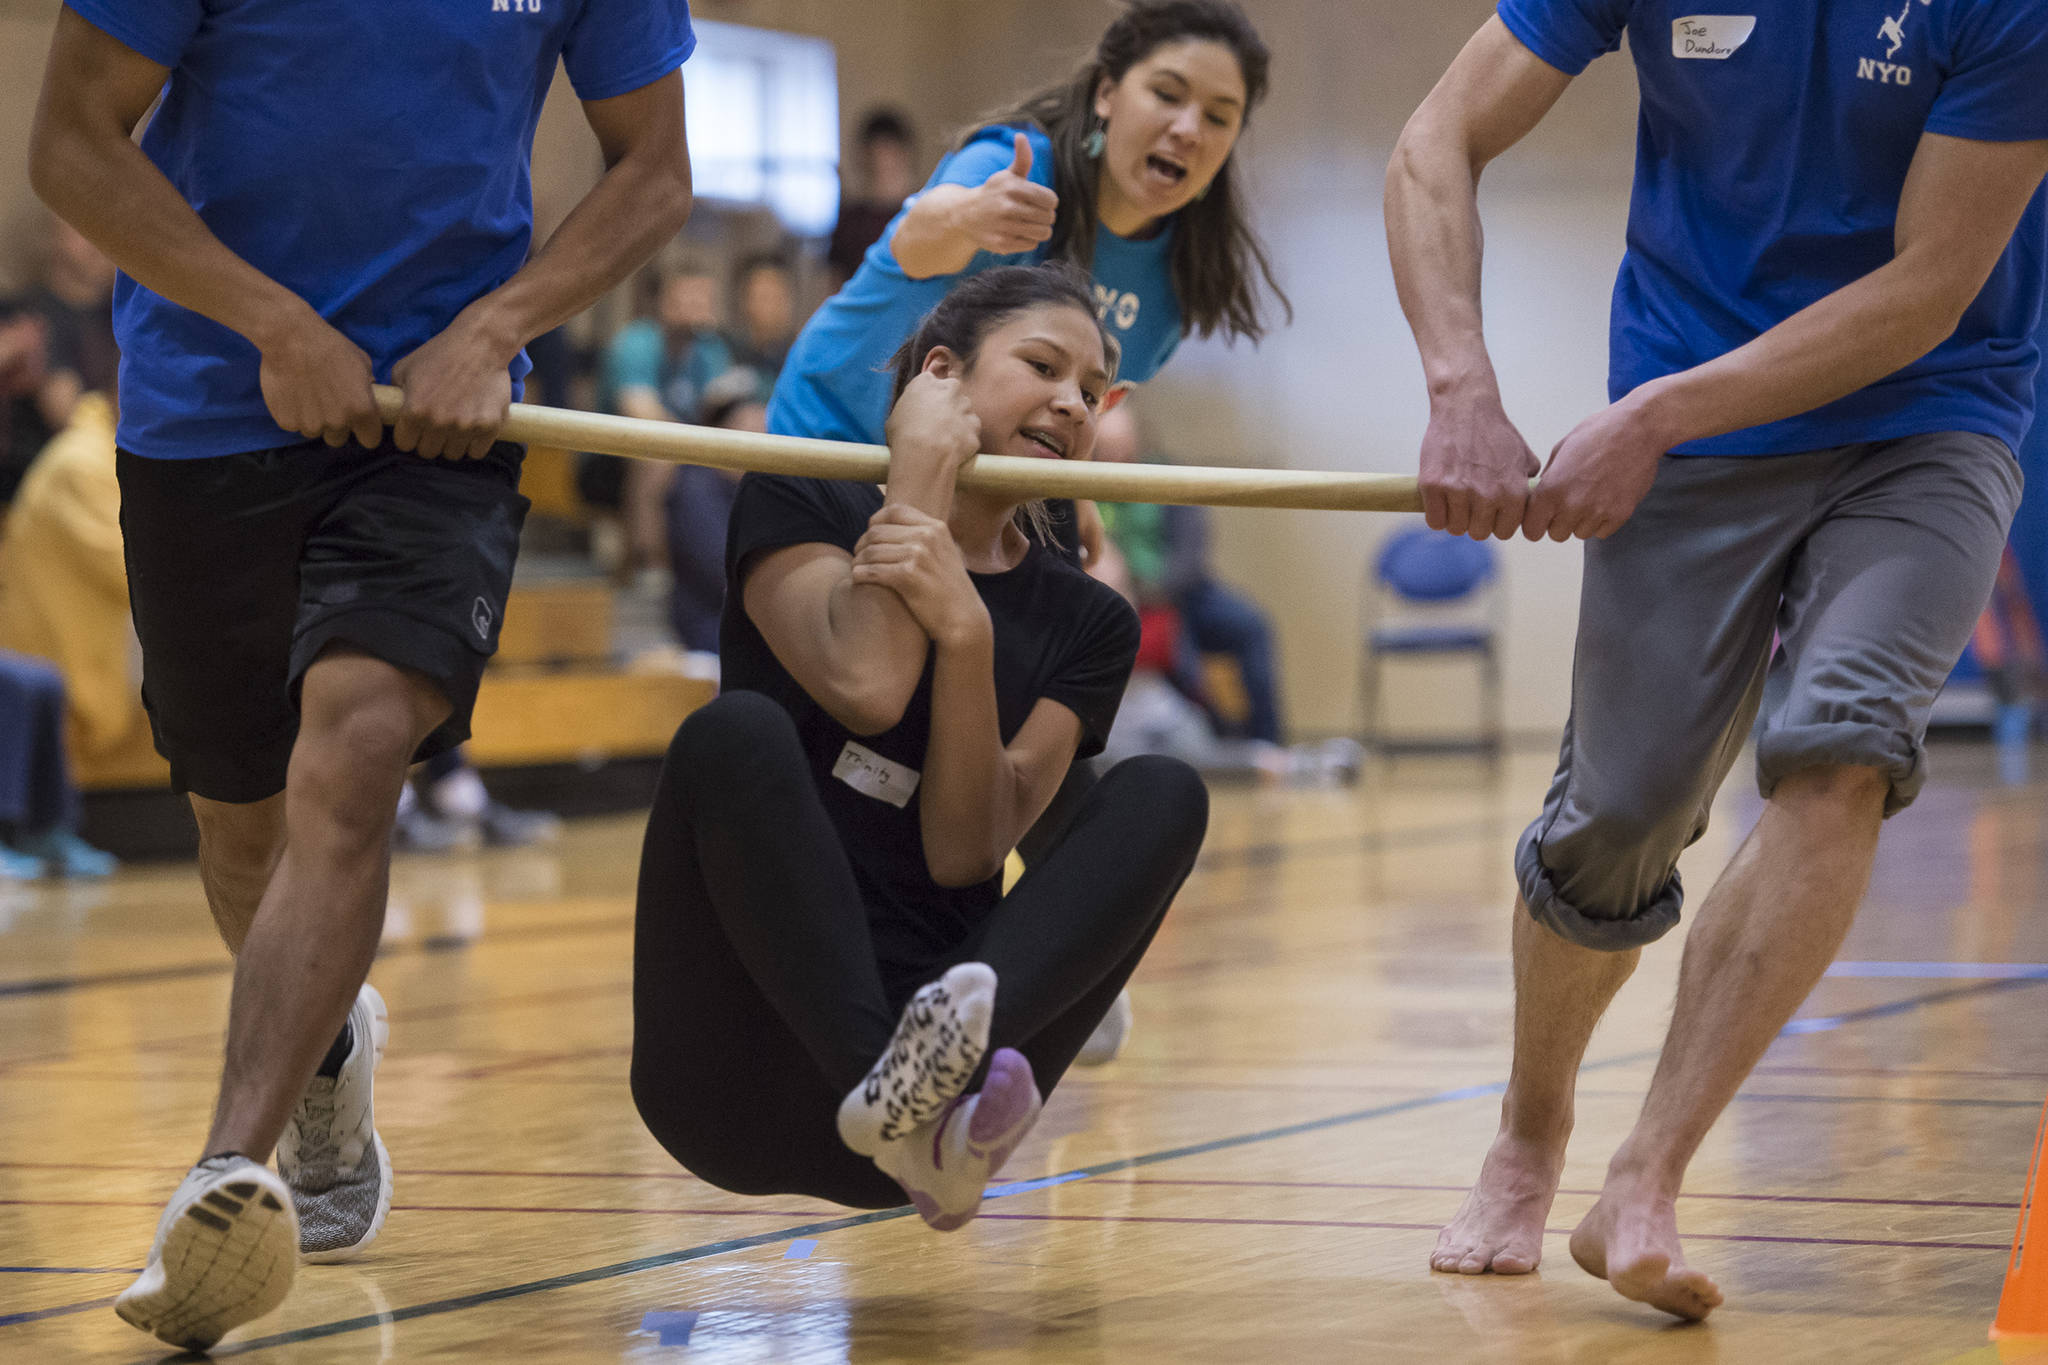 Trinity Jackson, 13, participates in the wrist carry as judge Elizabeth Rexford watches at the Native Youth Olympics 2018 Traditional Games at the University of Alaska Southeast Recreational Center in March 2018. Tuckwood won the event for middle school students. (Michael Penn | Juneau Empire File)